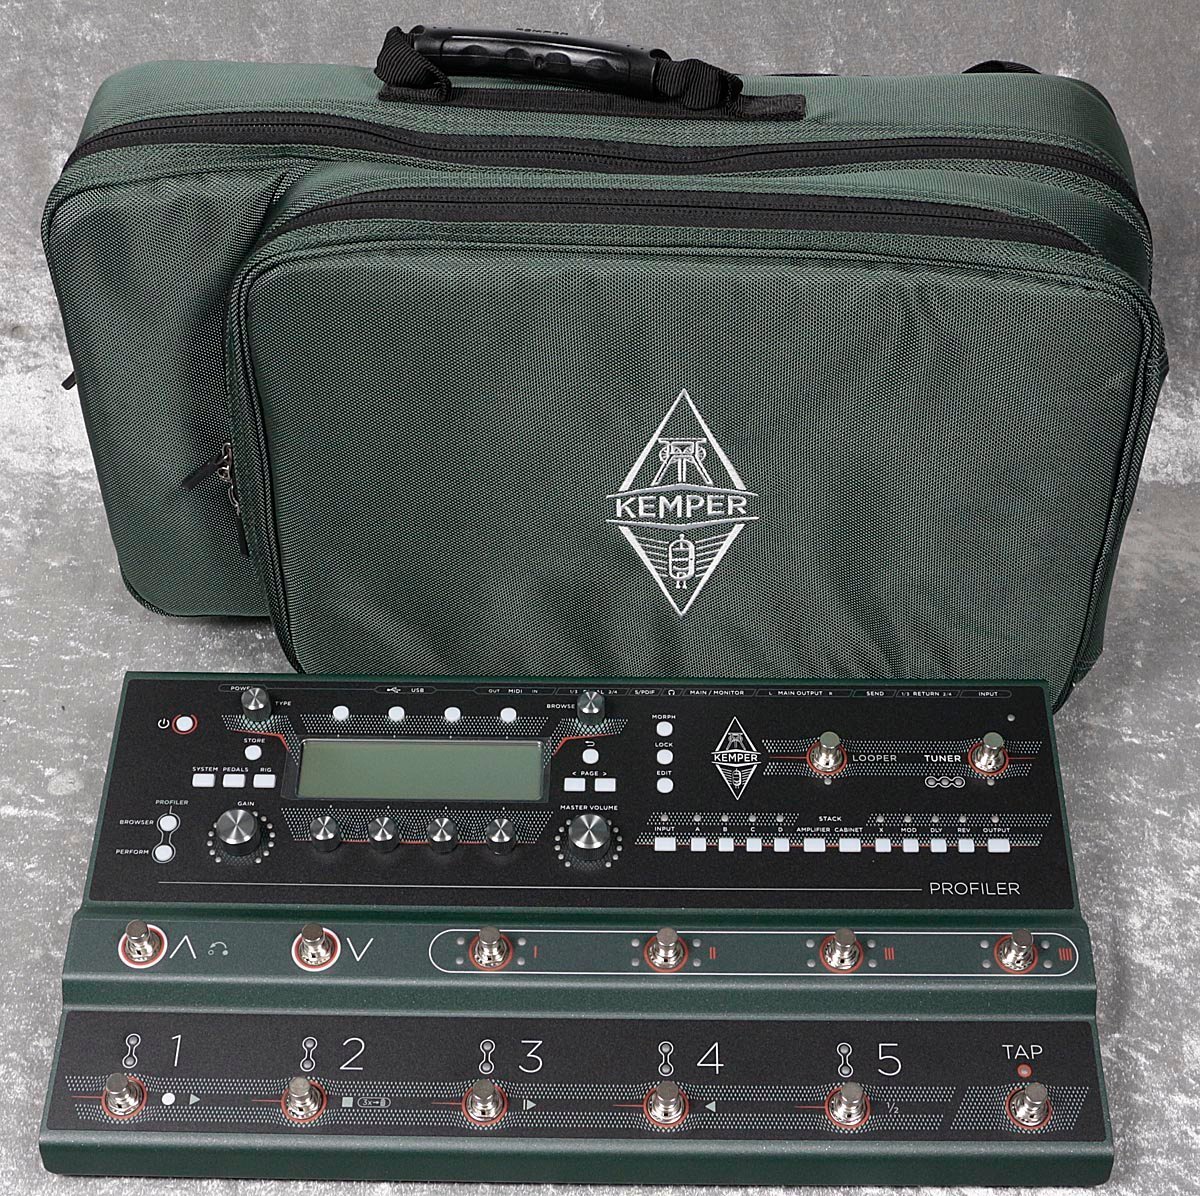 Kemper　Profiler　Case《アウトレット特価品》【特製リグプレゼント！】【新宿店】　Kemper　Stage　with　イシバシ楽器